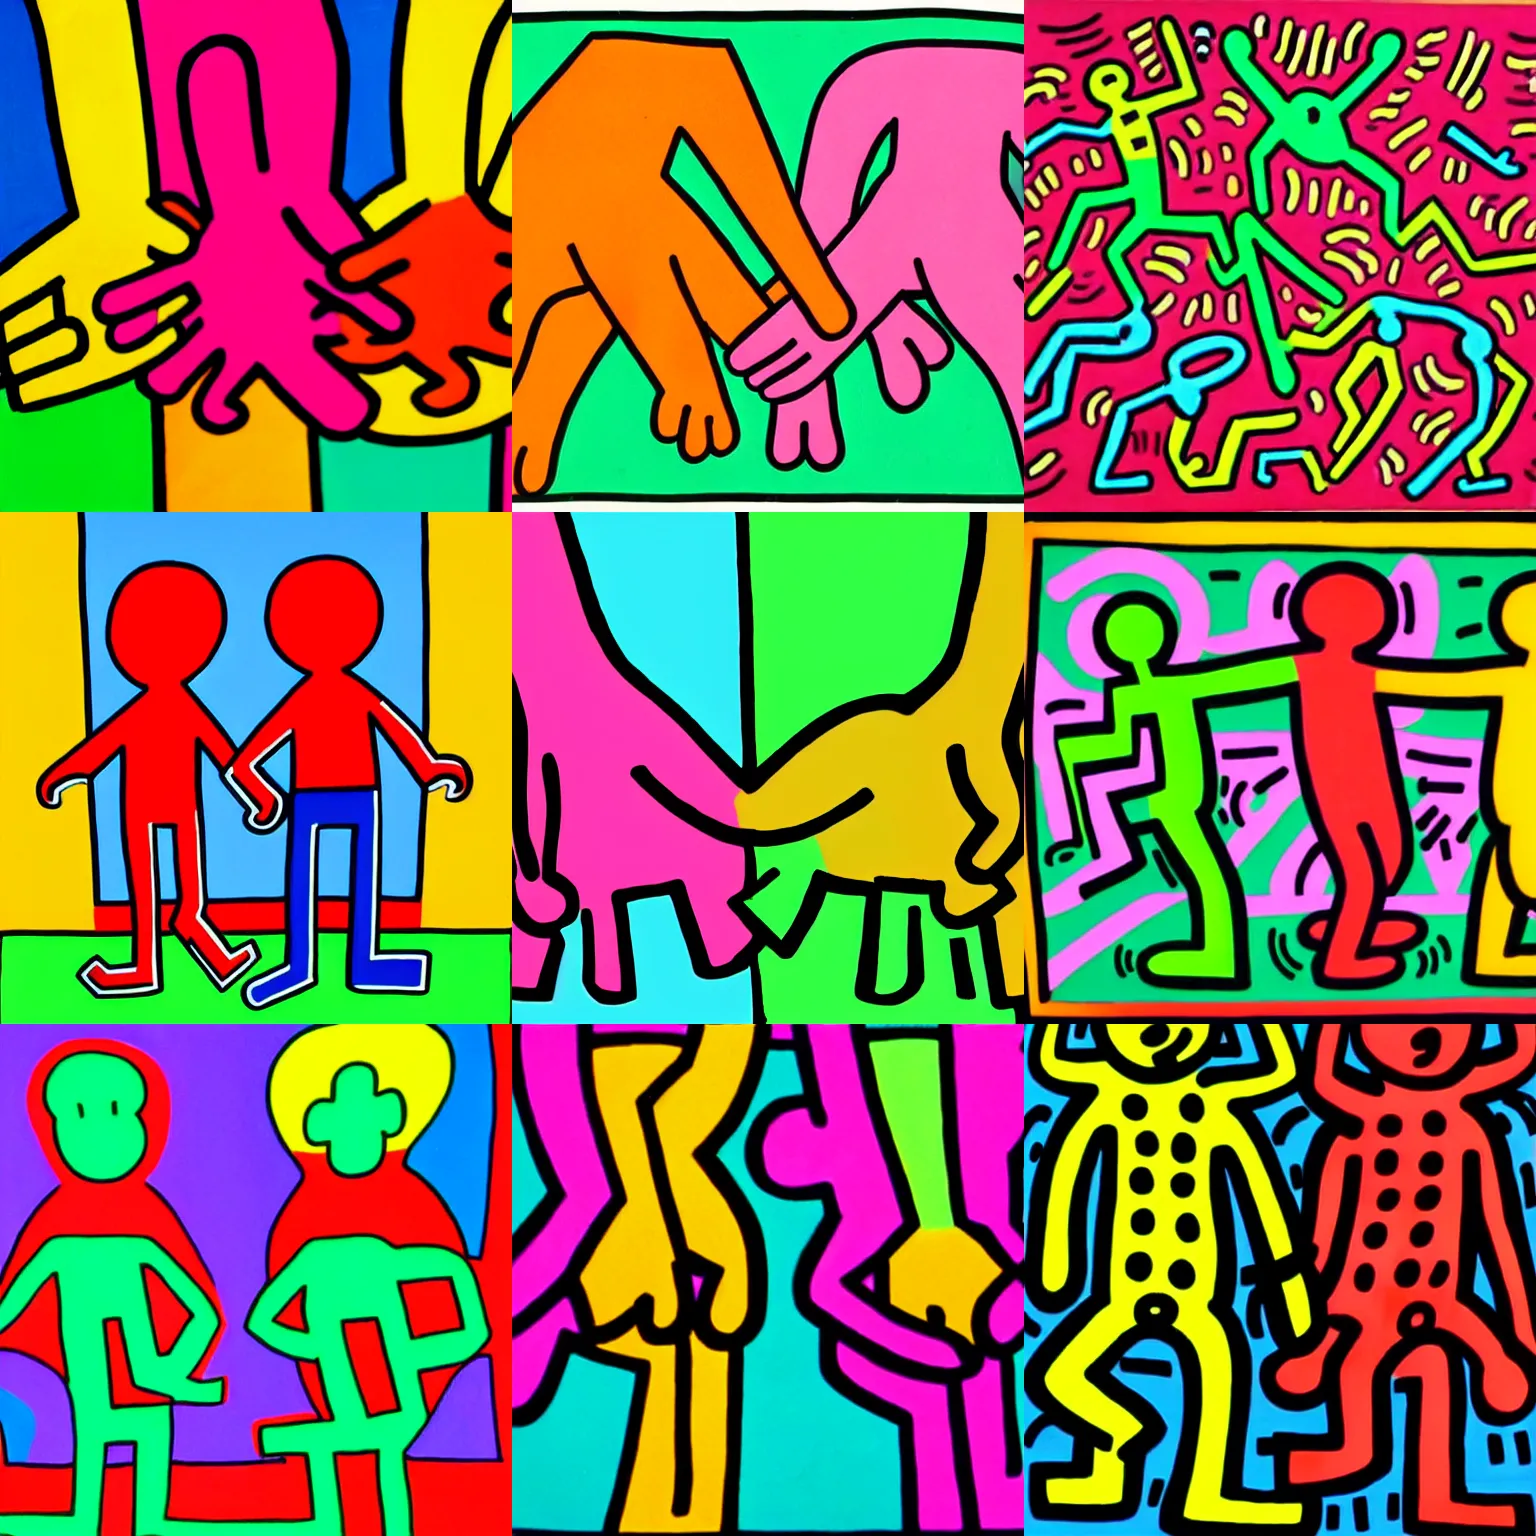 Prompt: 2 gay men holding hand by keith haring. fully clothed. colorful hd